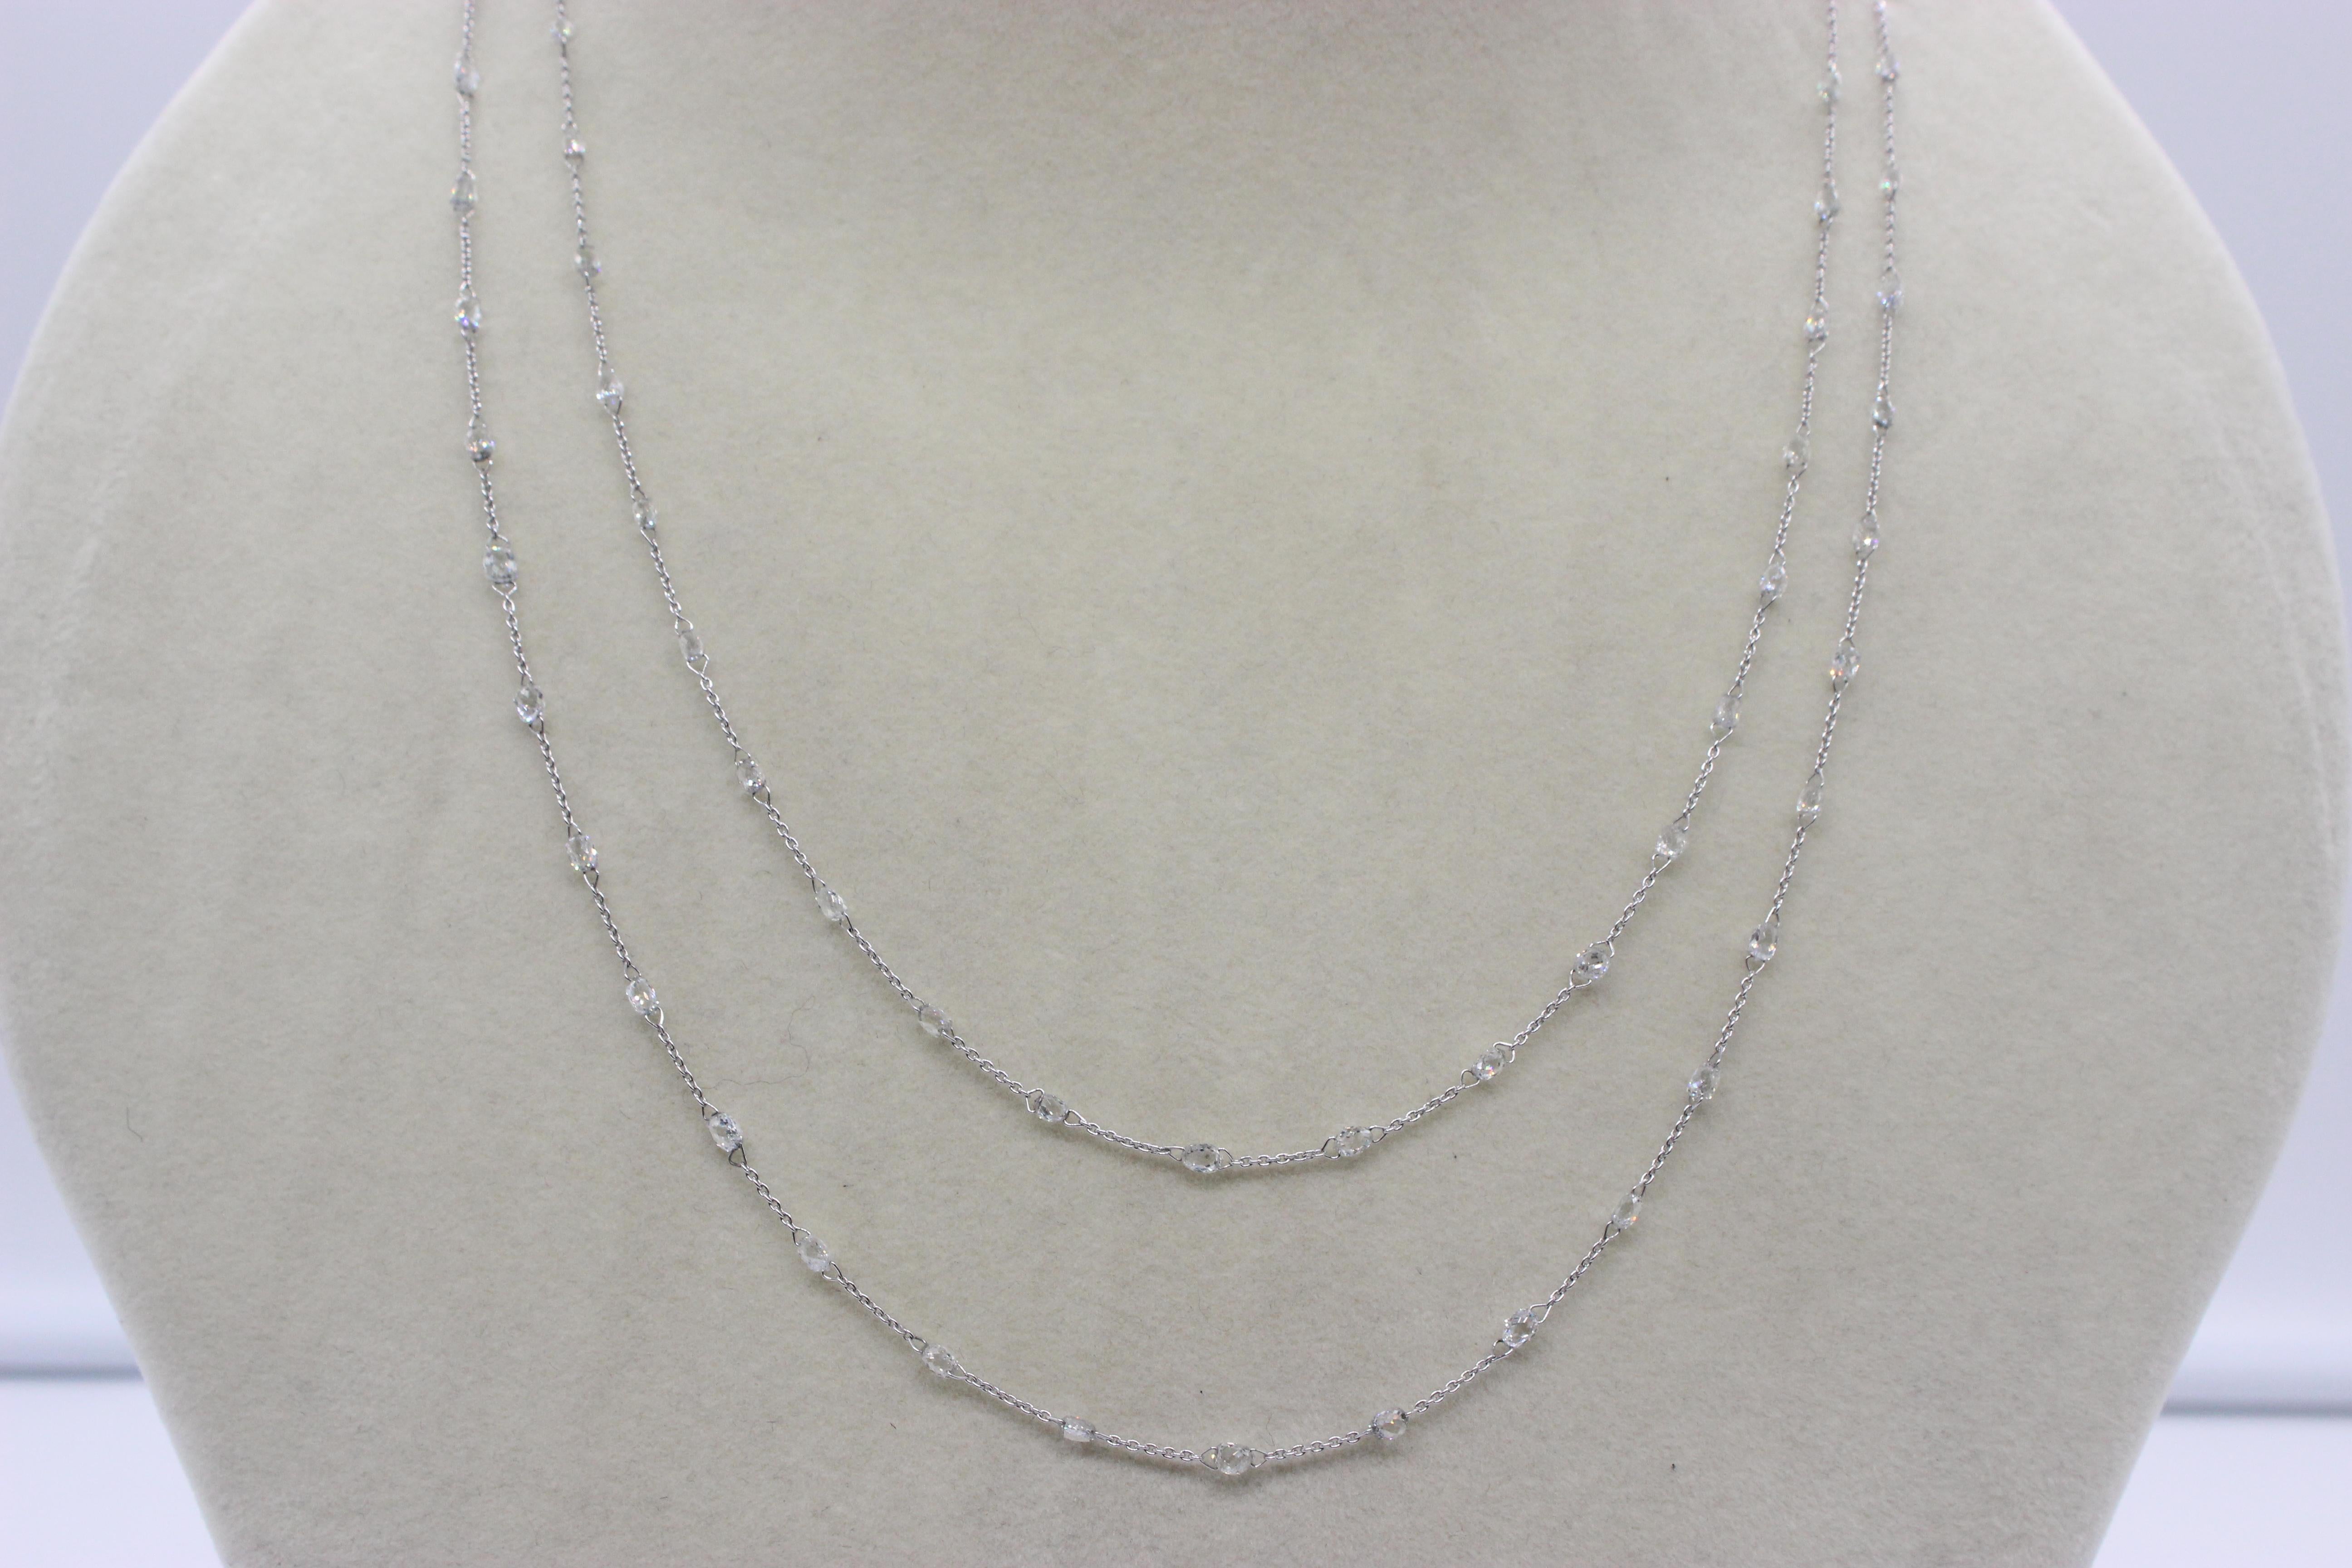 PANIM  10 Carat Diamond Briolette 18 Karat White Gold Necklace In New Condition For Sale In Tsim Sha Tsui, Hong Kong